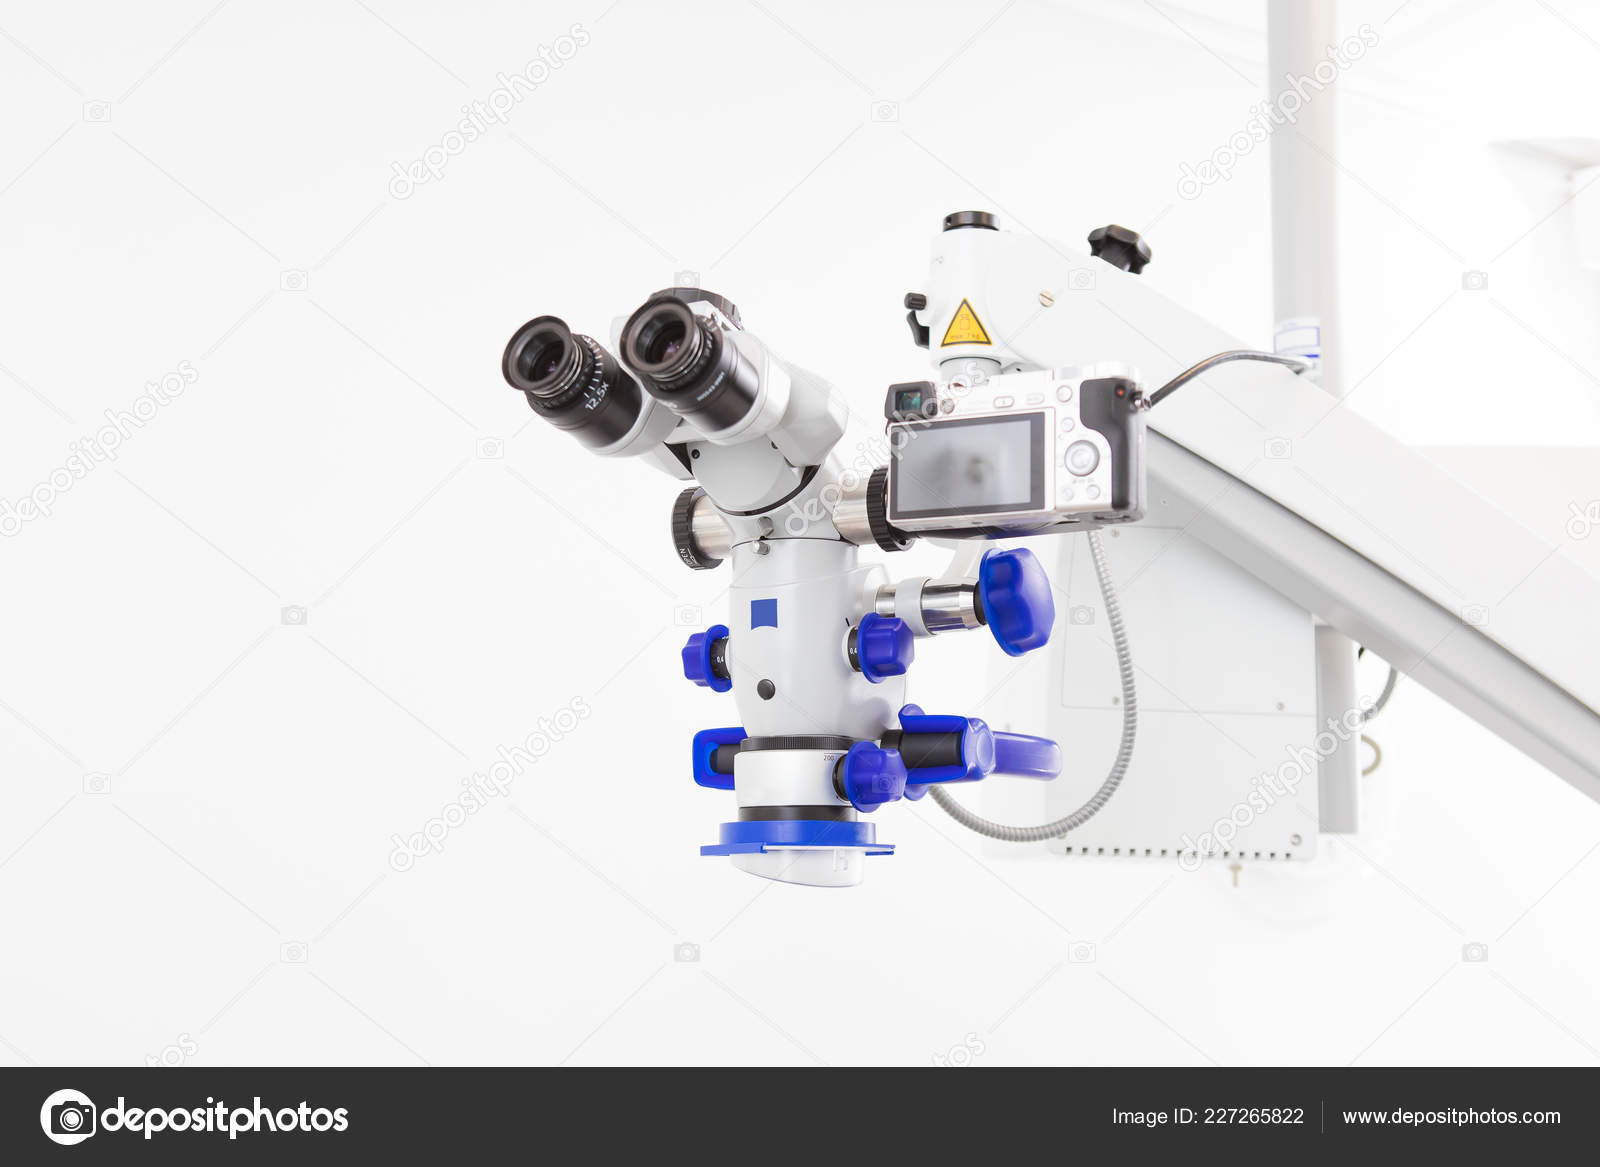 gas Spelling Distill Image of a professional dental endodontic binocular microscope with a  camera Stock Photo by ©starik_73 227265822